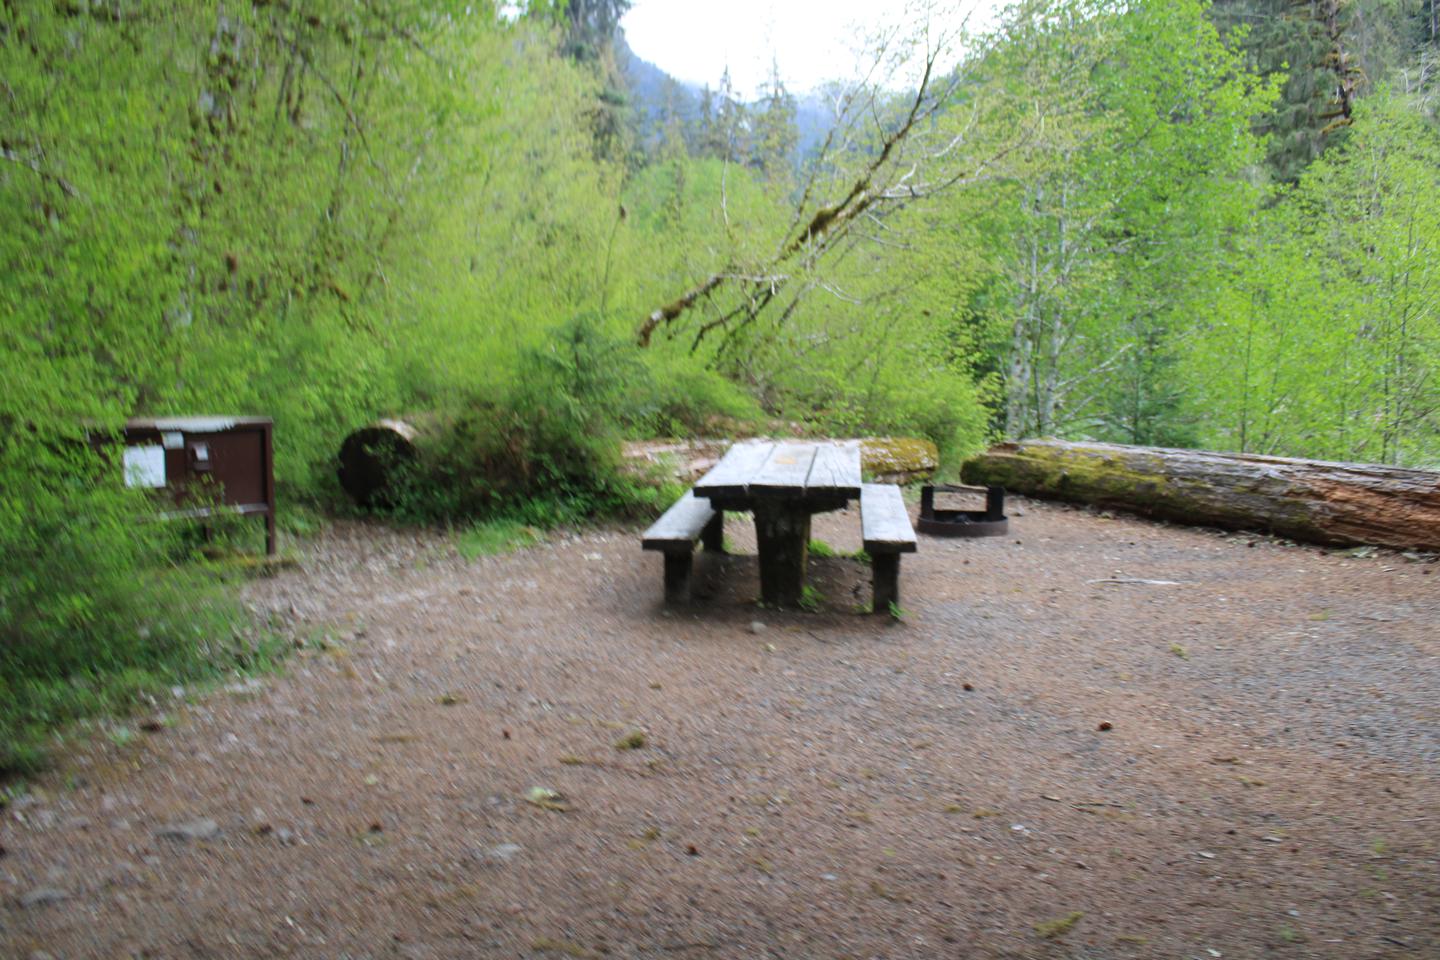 Picnic table and fire pit